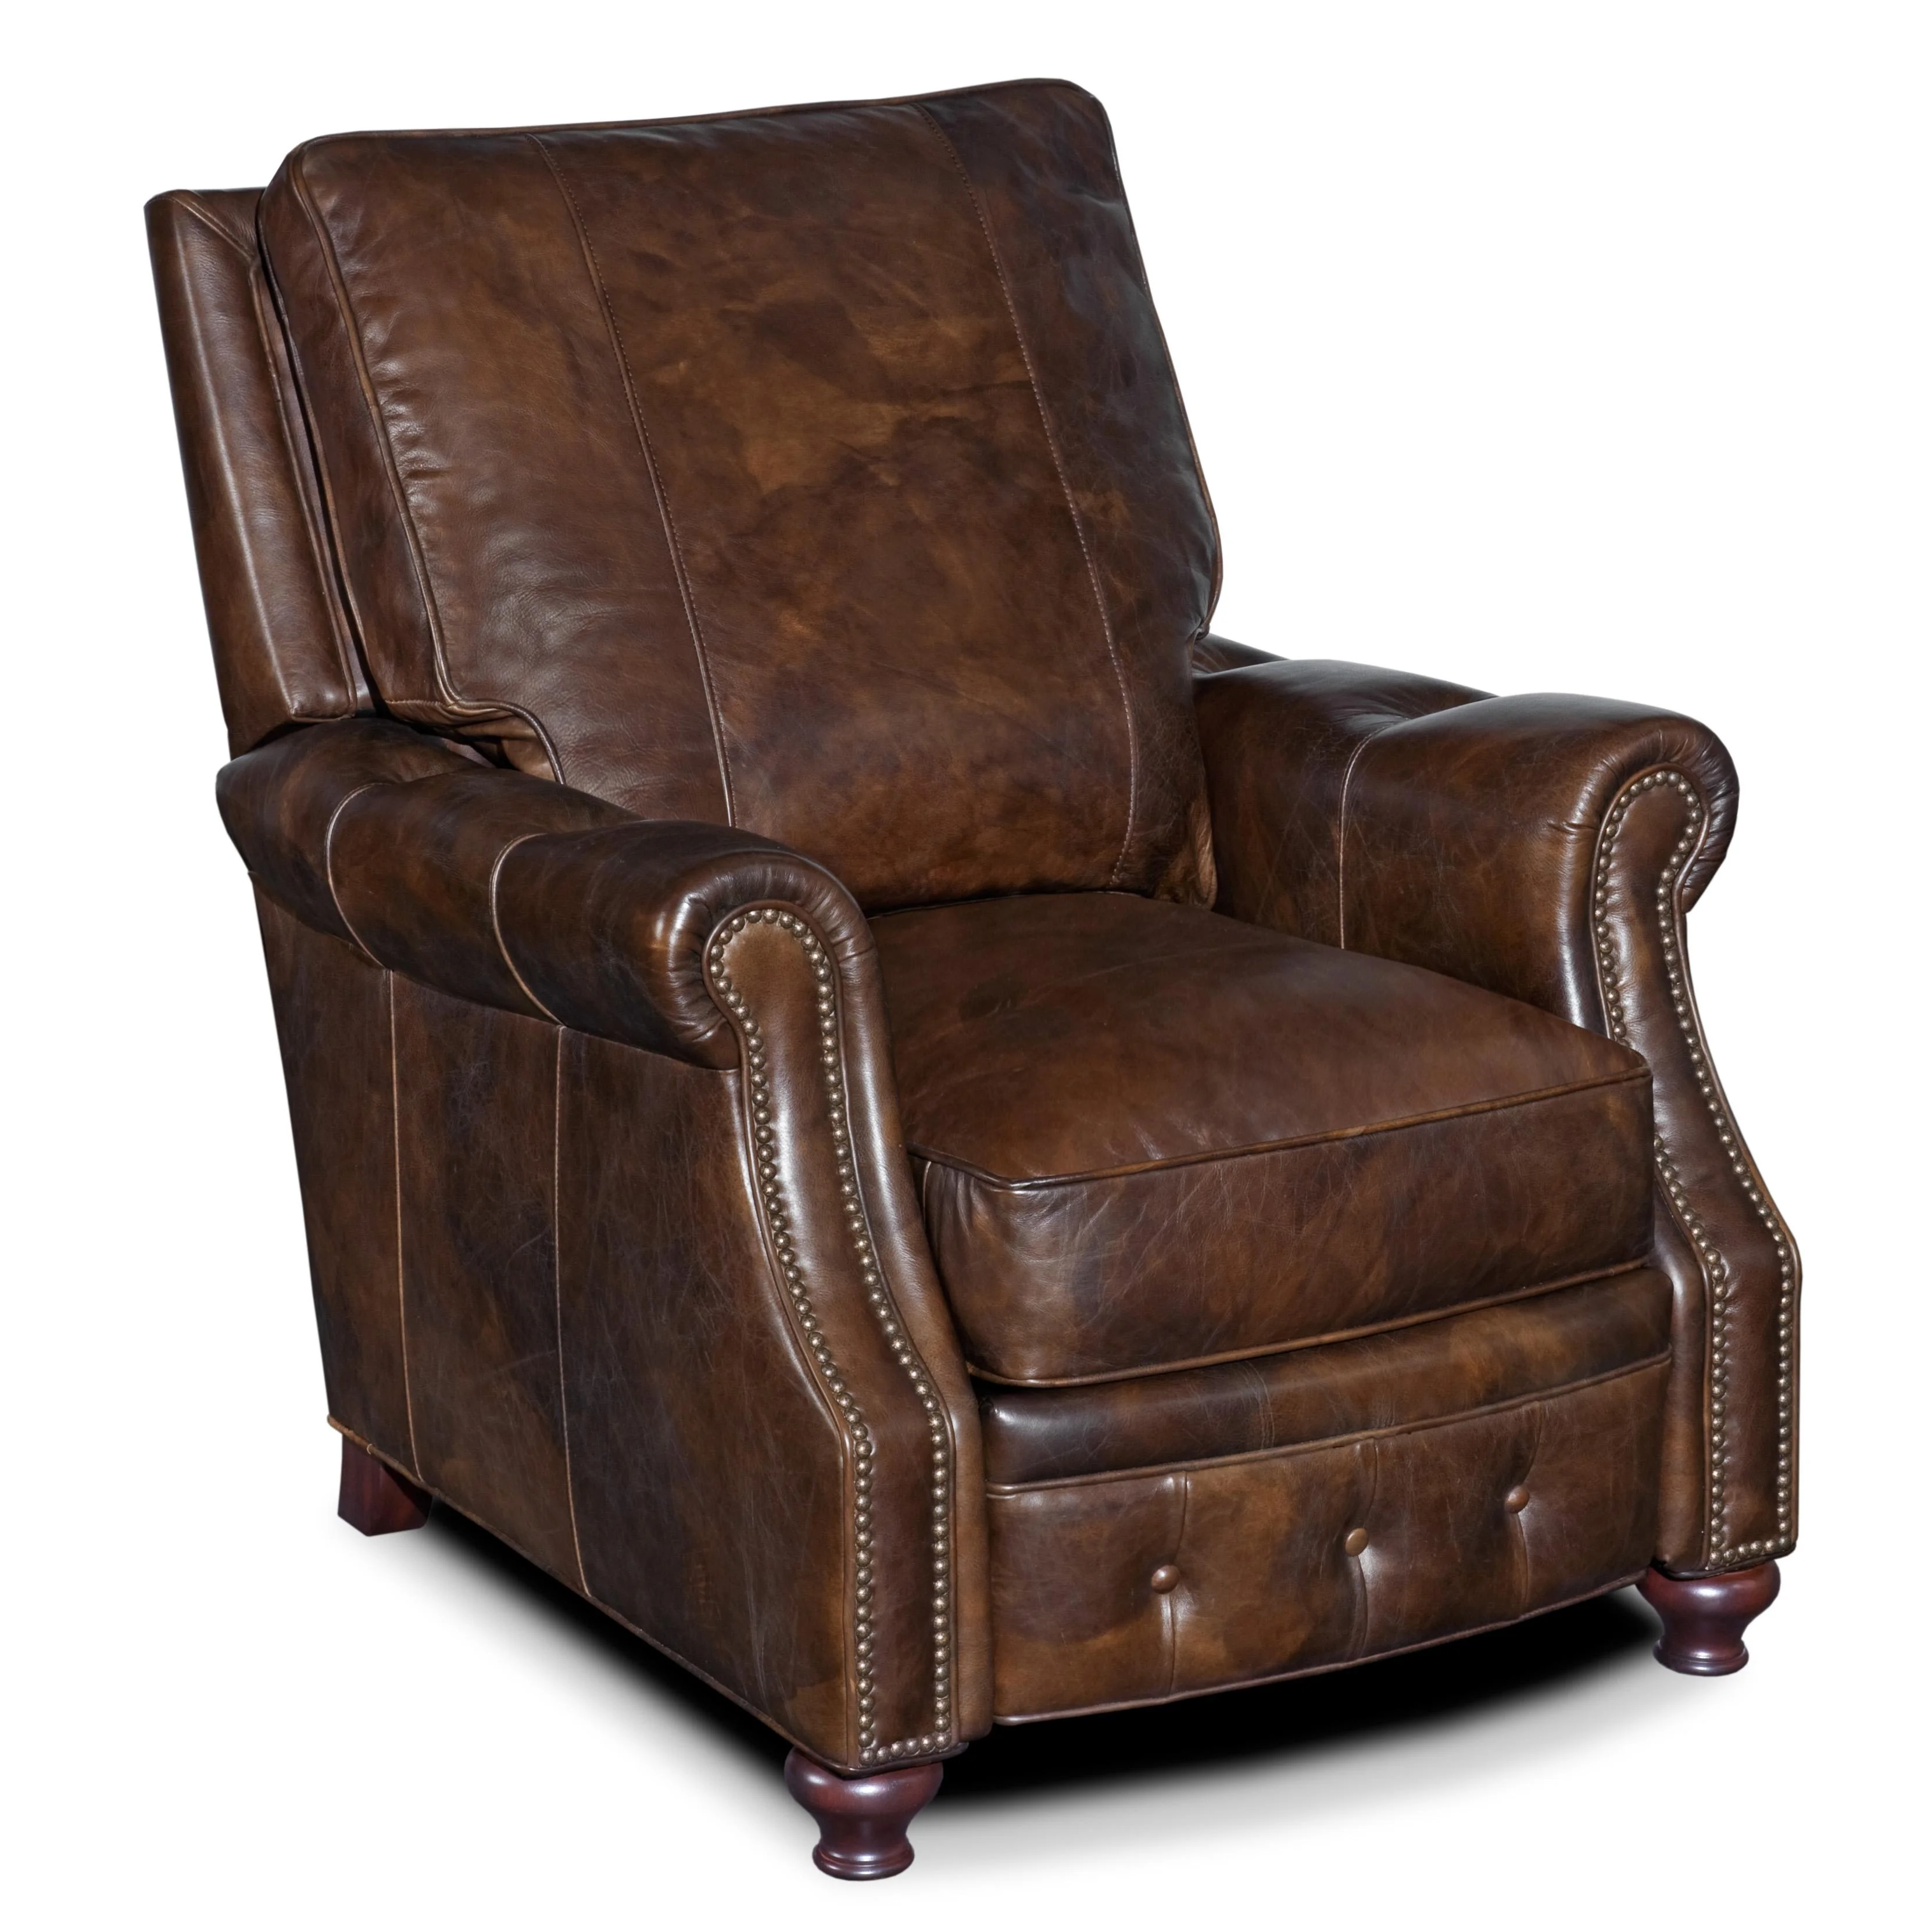 Upholstery & Leather - Old Colony Furniture